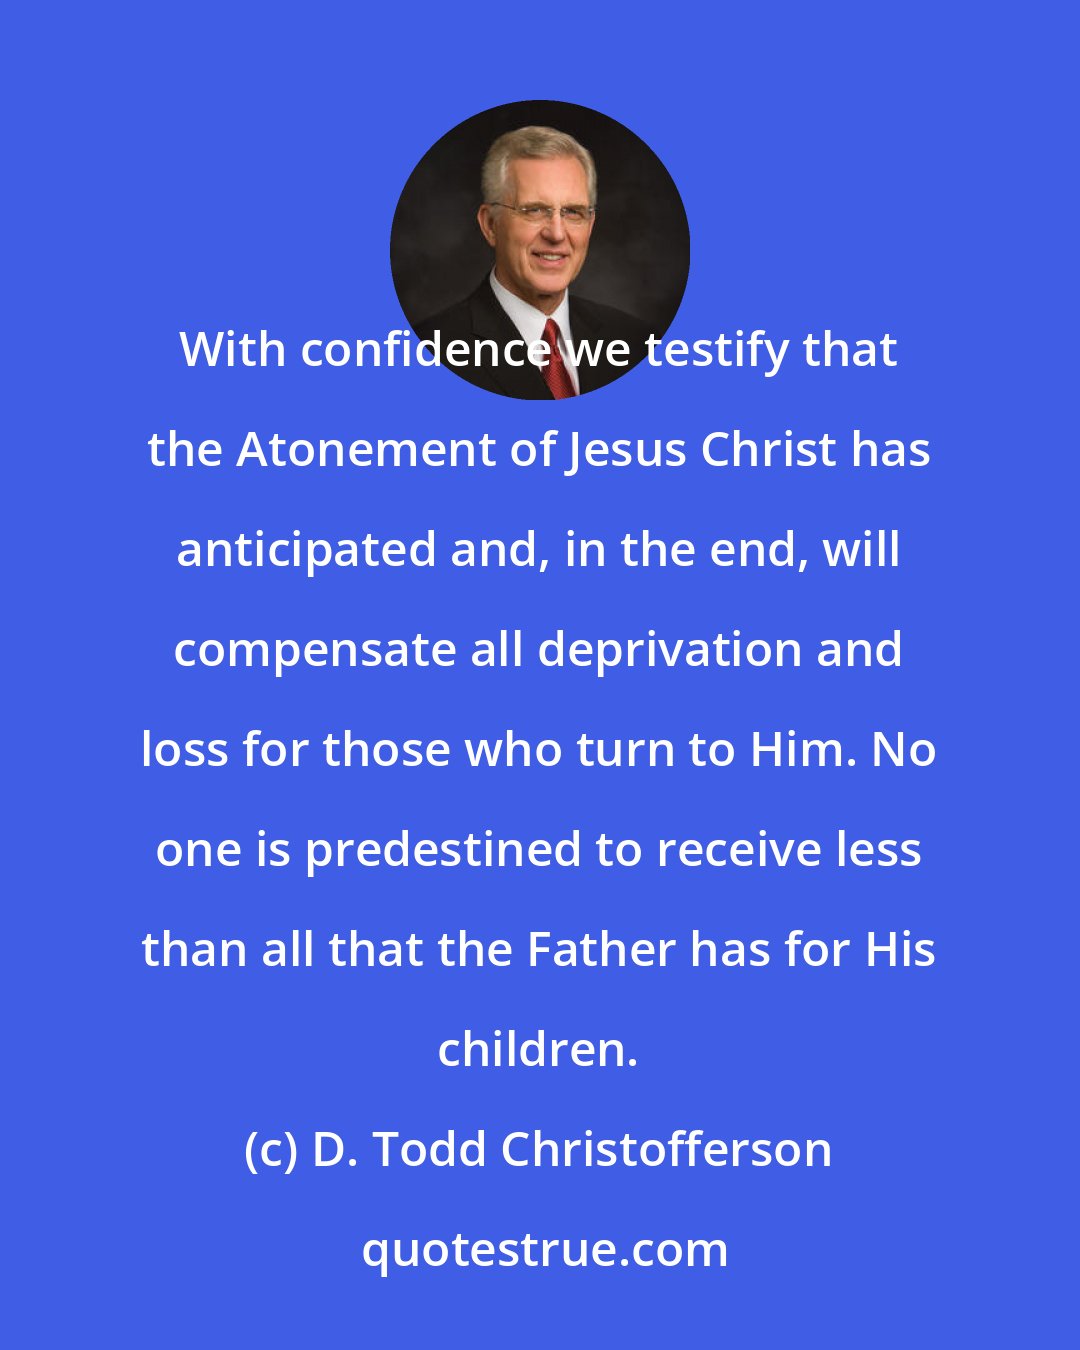 D. Todd Christofferson: With confidence we testify that the Atonement of Jesus Christ has anticipated and, in the end, will compensate all deprivation and loss for those who turn to Him. No one is predestined to receive less than all that the Father has for His children.